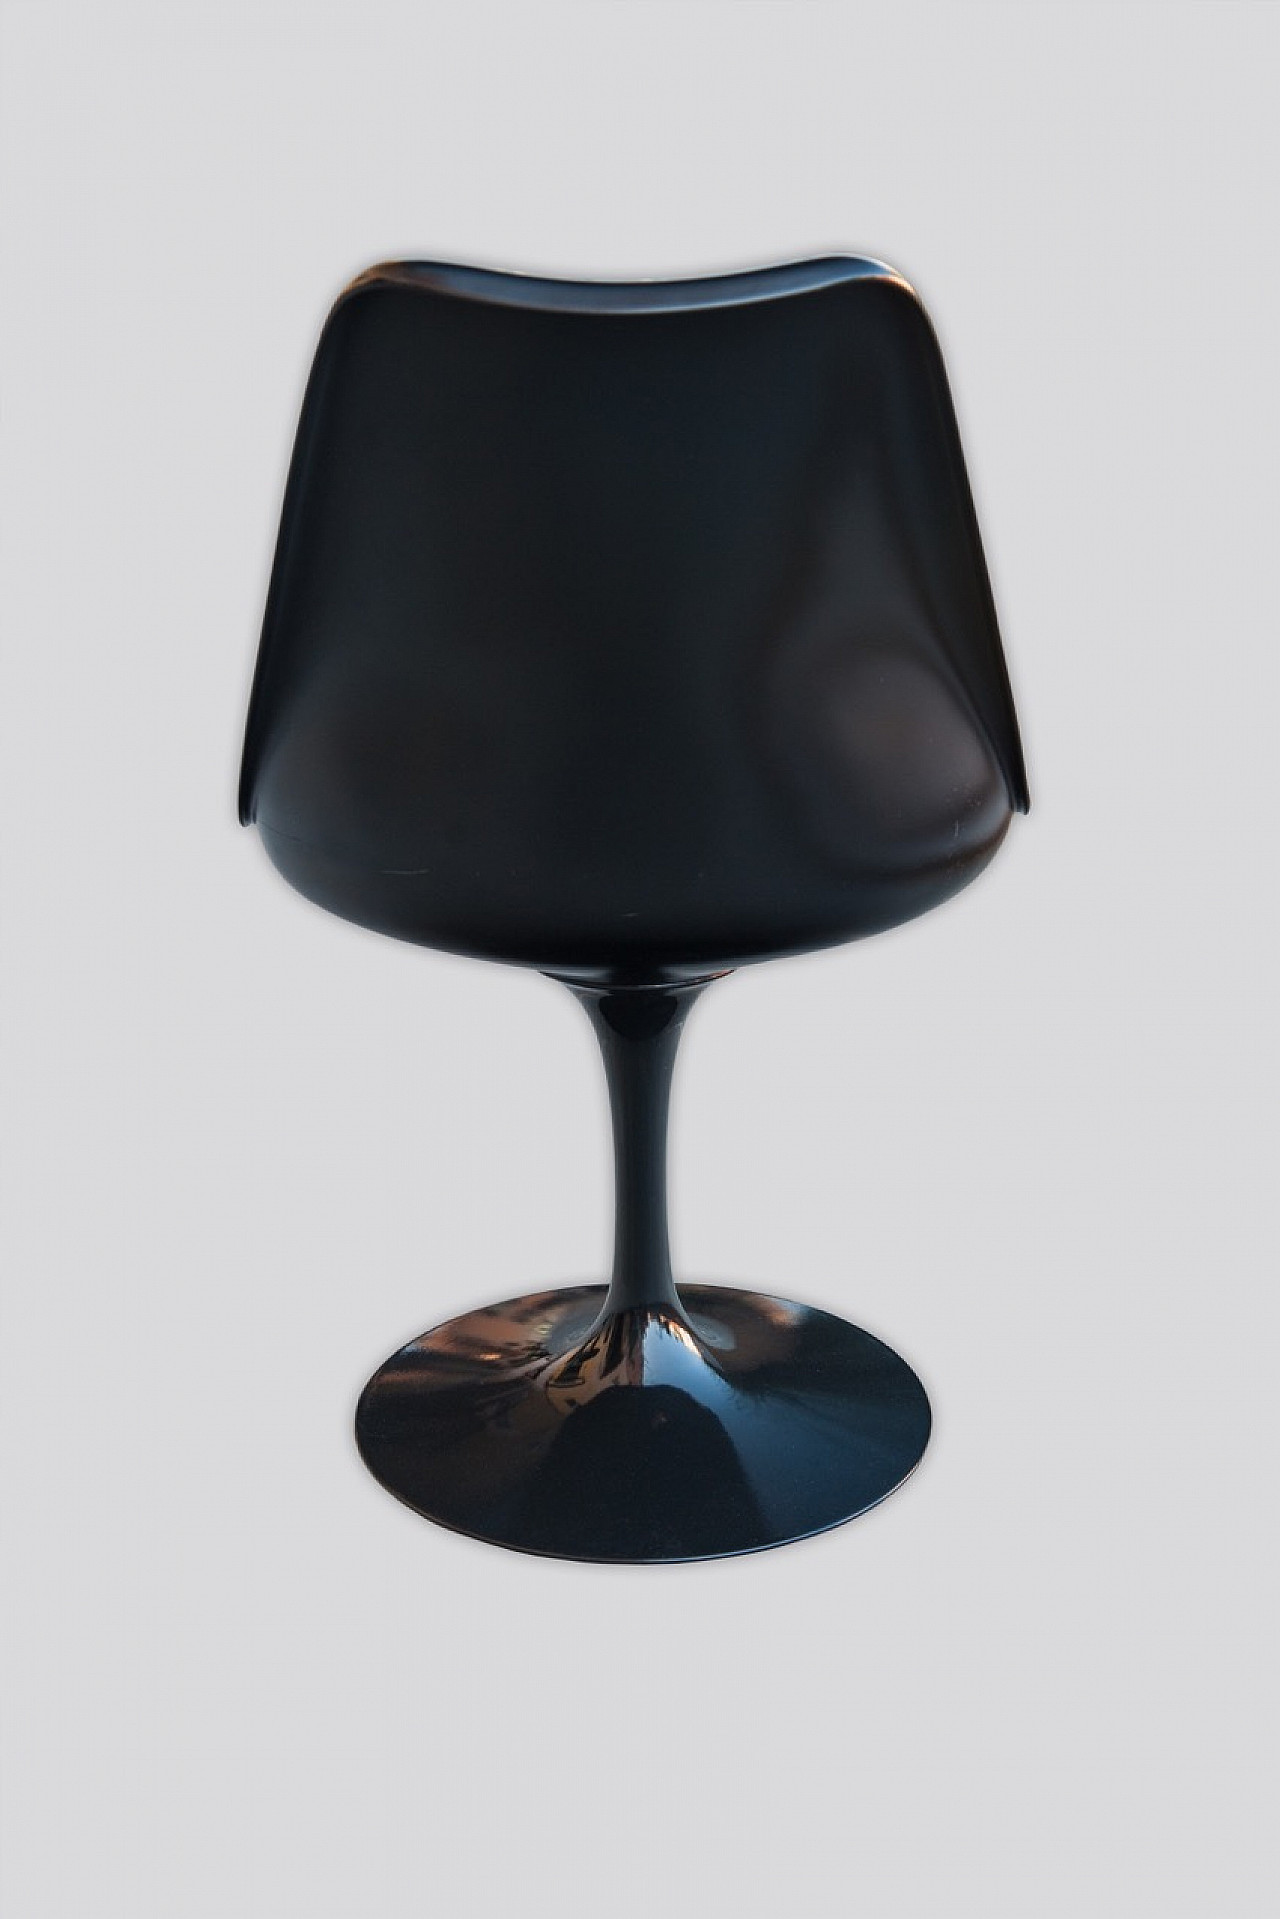 6 "Tulip" black swivel chairs by Eero Sarinen for Knoll 4